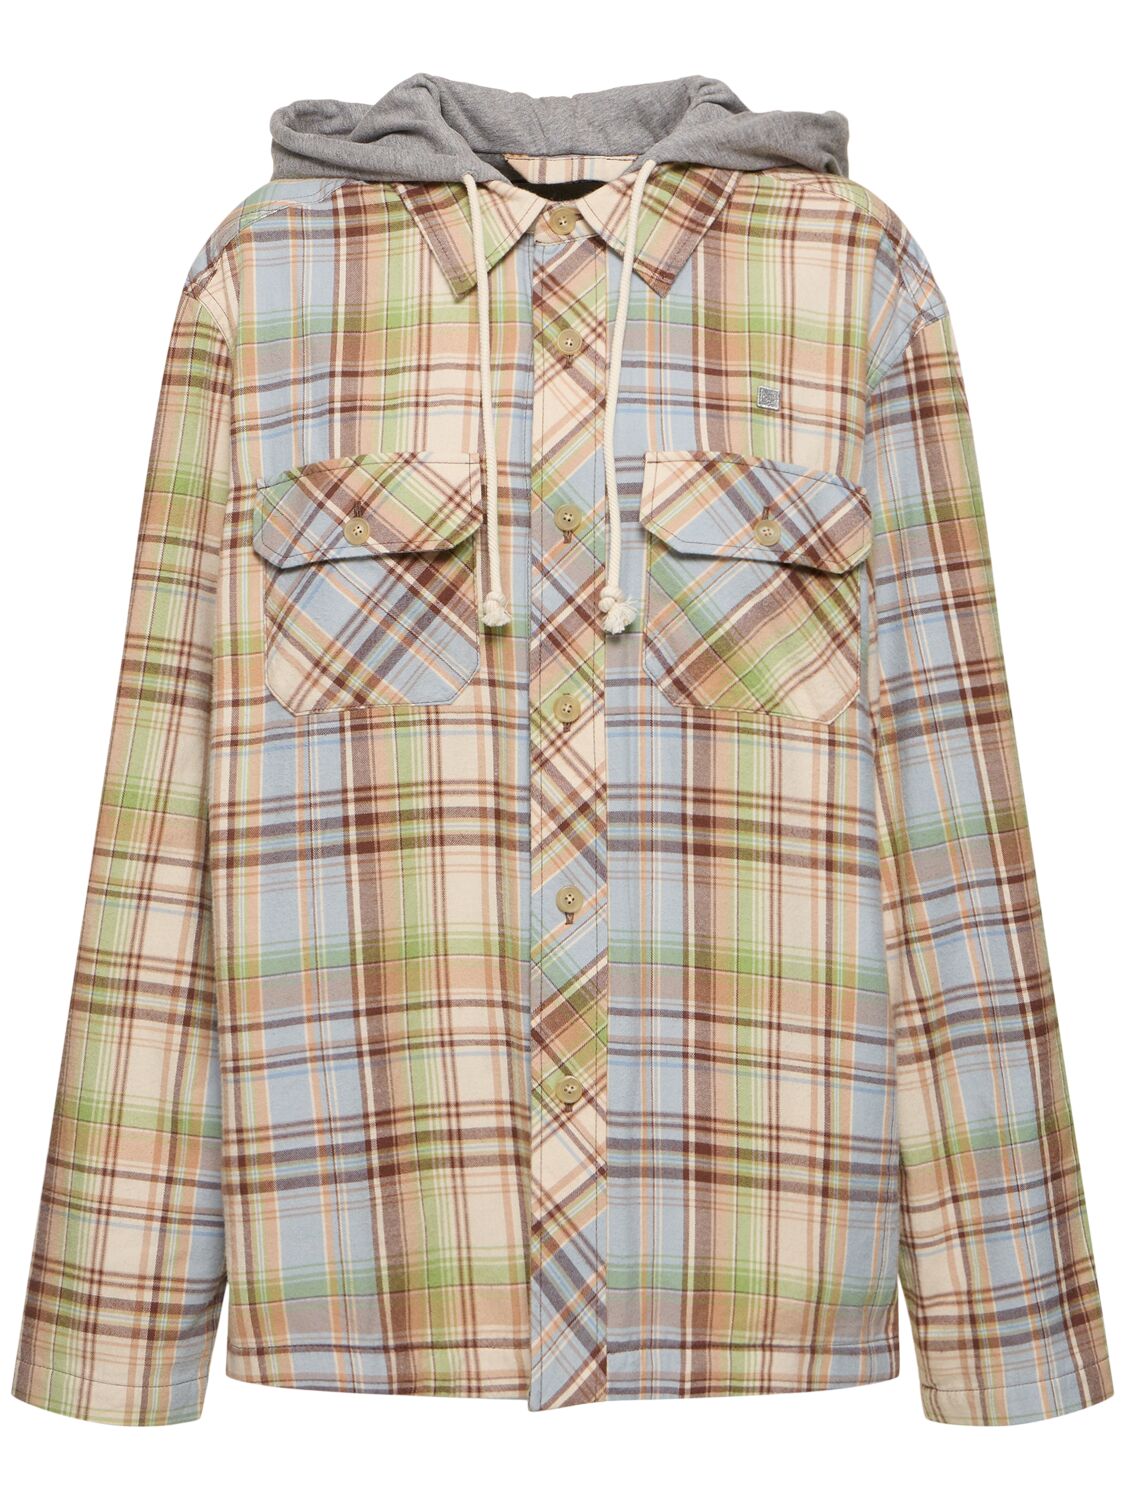 Acne Studios Ollier Check Cotton Canvas Jacket In Brown/green